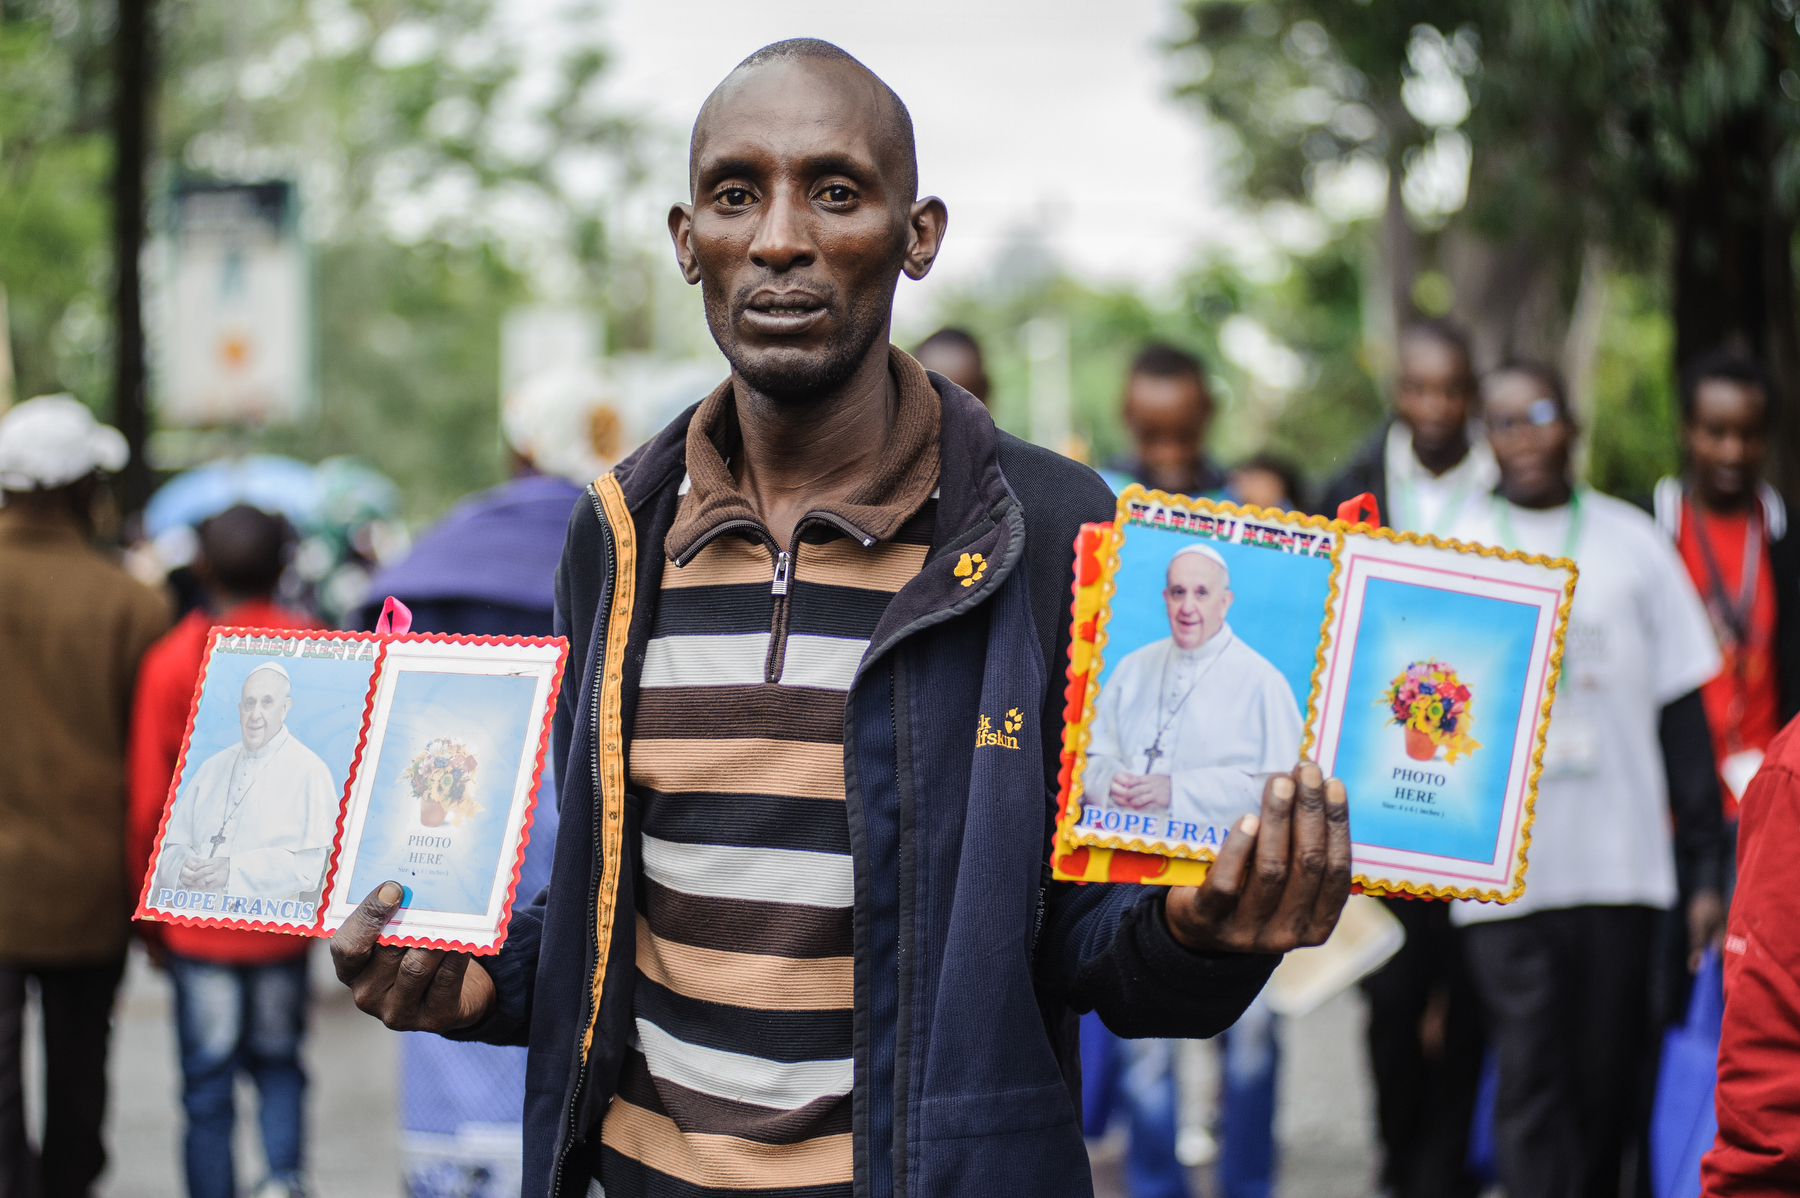  A man sells pictures of Pope Francis outside University of Nairobi on 26 November 2015. Pope Francis is on a five-day visit to Kenya, Uganda and Central African Republic (CAR). AFP PHOTO/Jennifer Huxta 